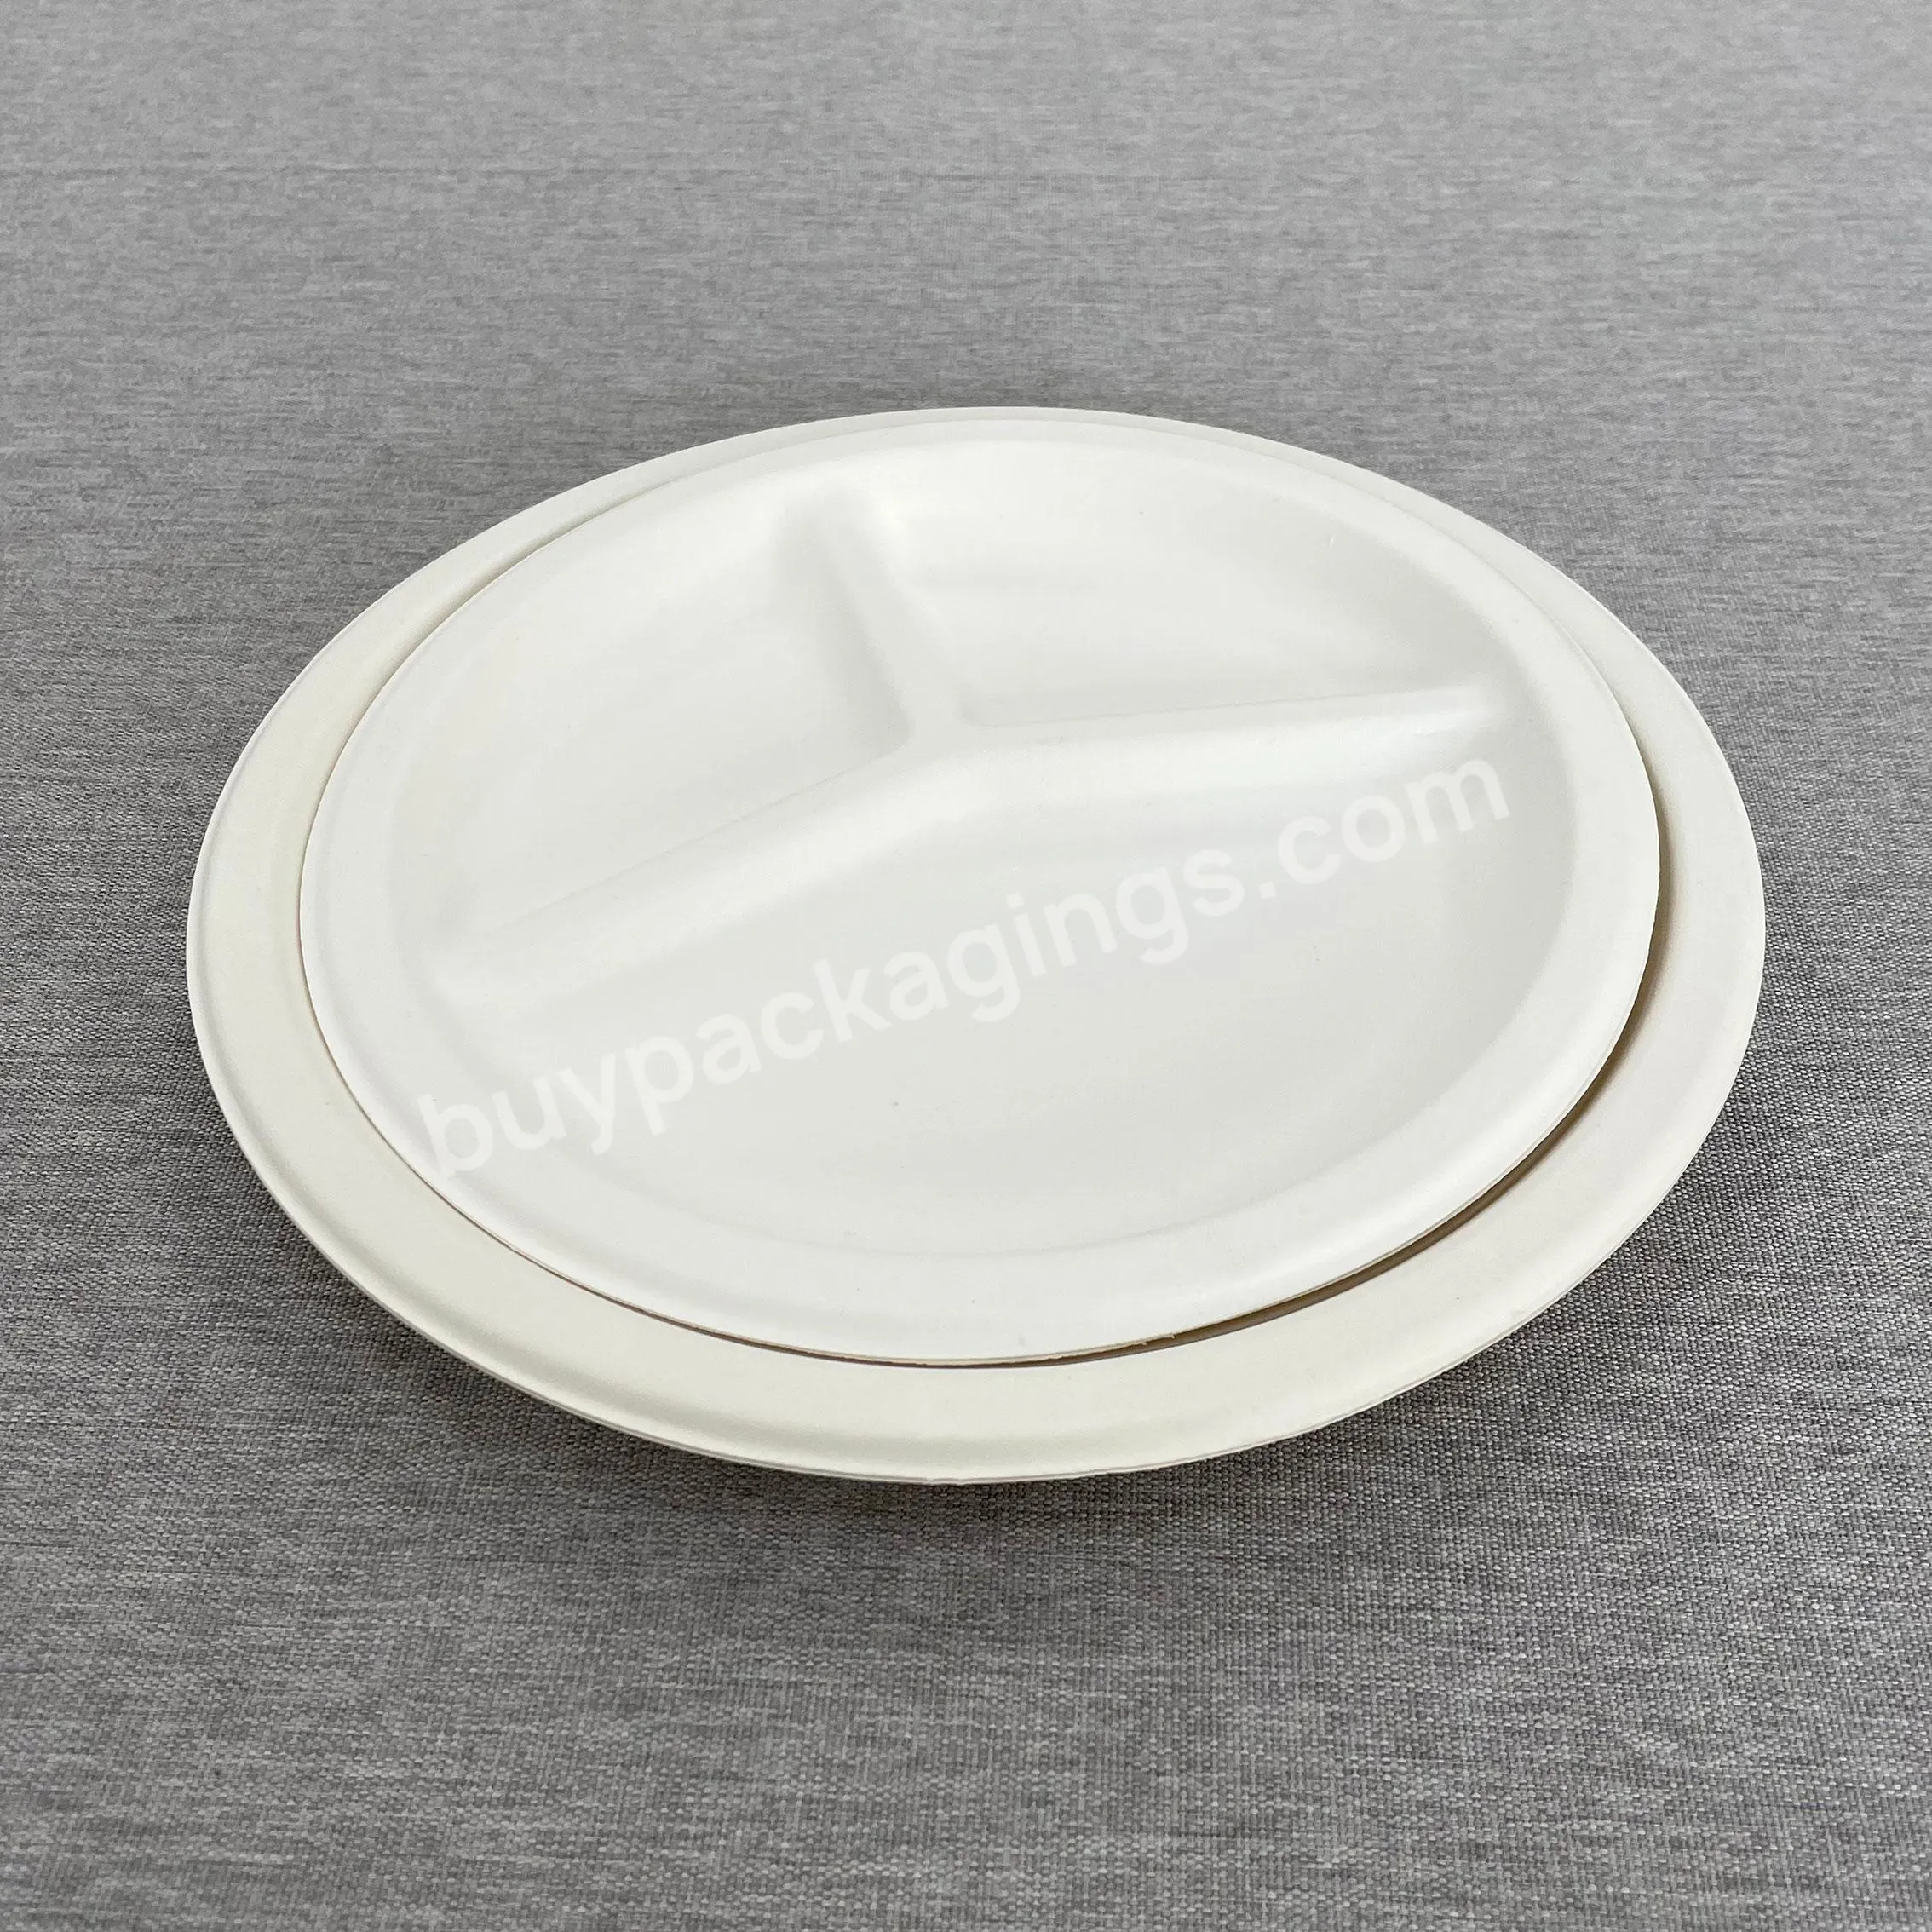 100% Compostable Christmas Round Disposable Heavy Duty 10 Inch Premium Paper Dishes Plates 125 Pack - Buy 100% Compostable 10 Inch Paper Plates 125-pack,10 Inch Paper Plates,Disposable Paper Dish Plates.